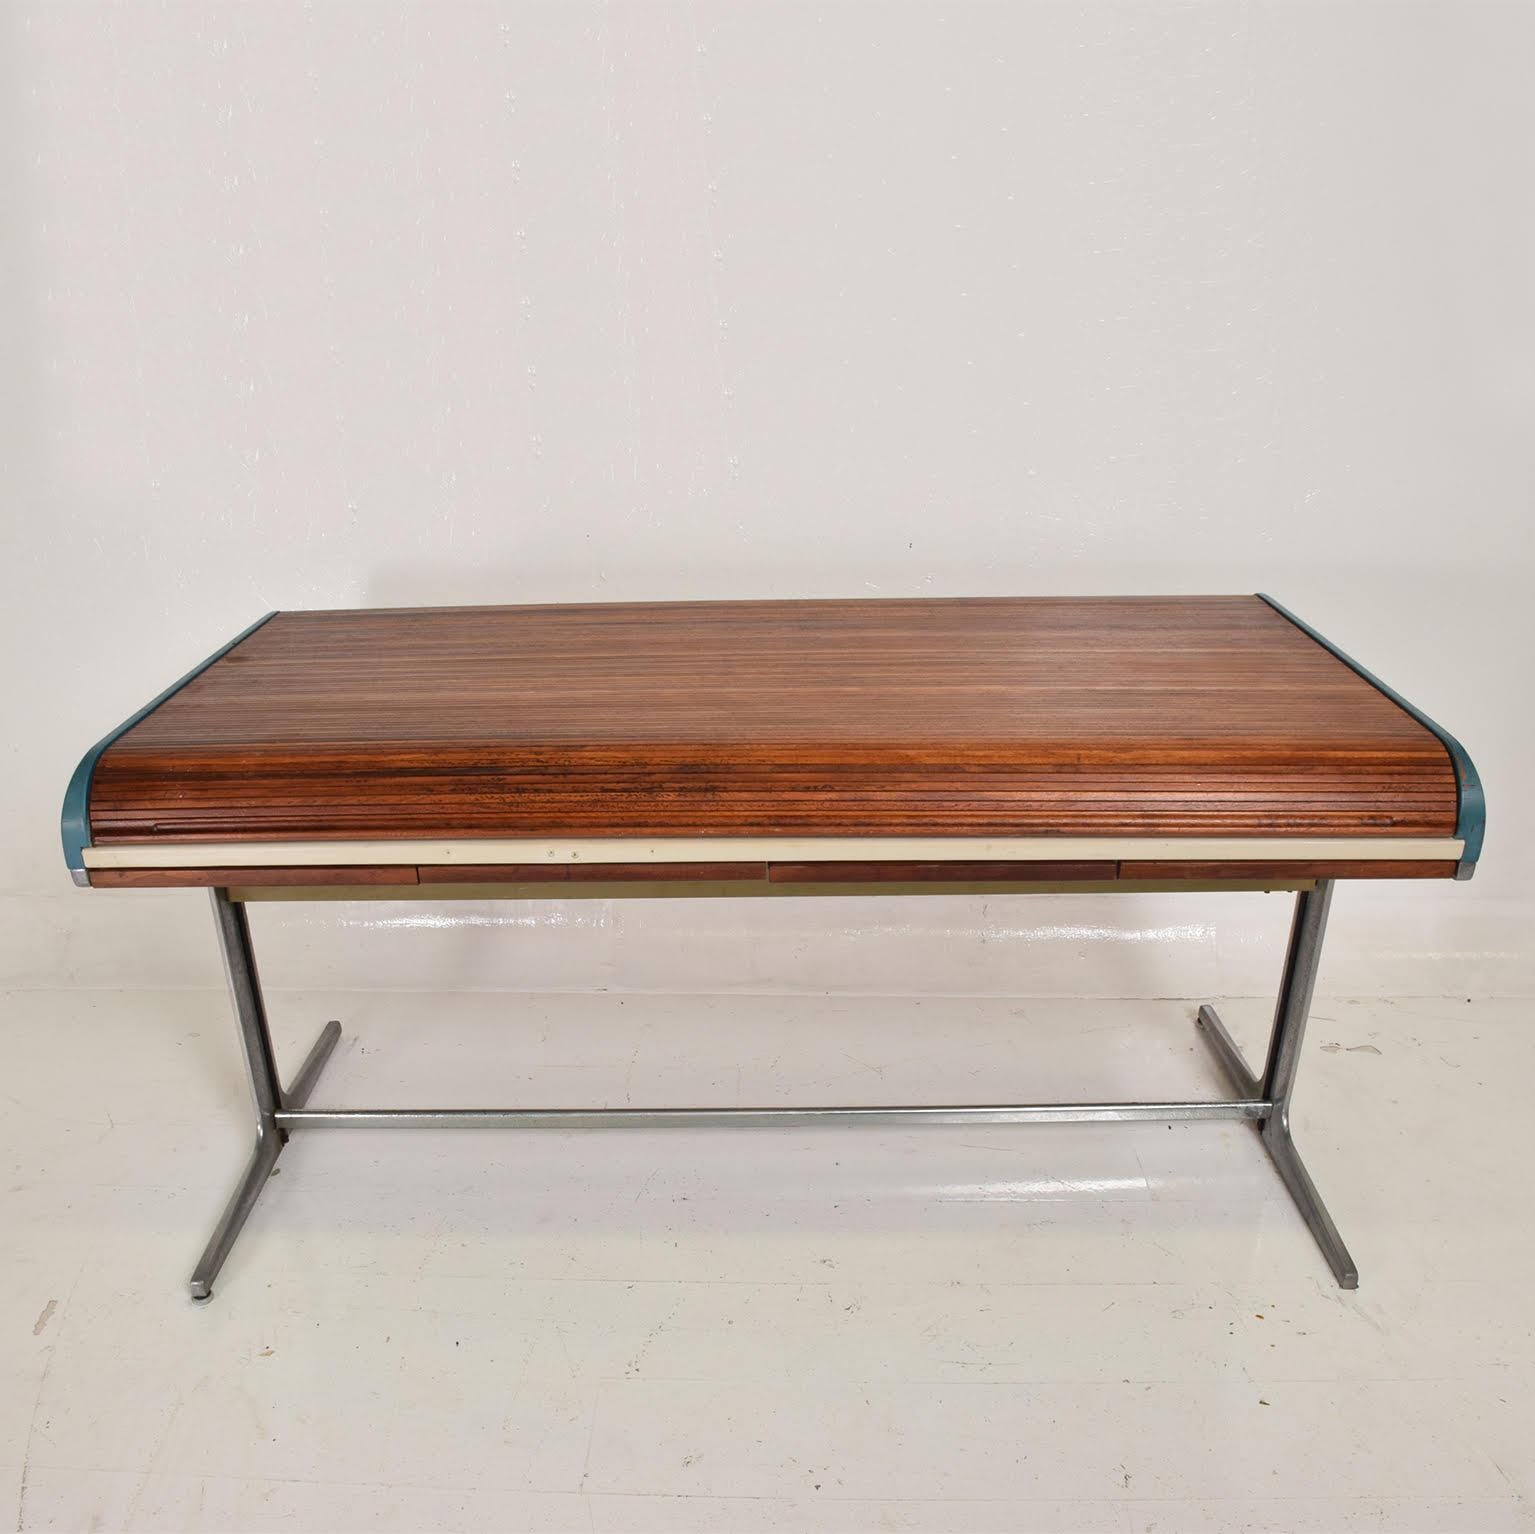 For your consideration, a rare action desk designed by George Nelson & Robert Propst for Herman Miller. The USA, circa 1960s.

Beautiful original character/patina. Rolled top in walnut wood, with lots of storage.

Expect signs of vintage wear.